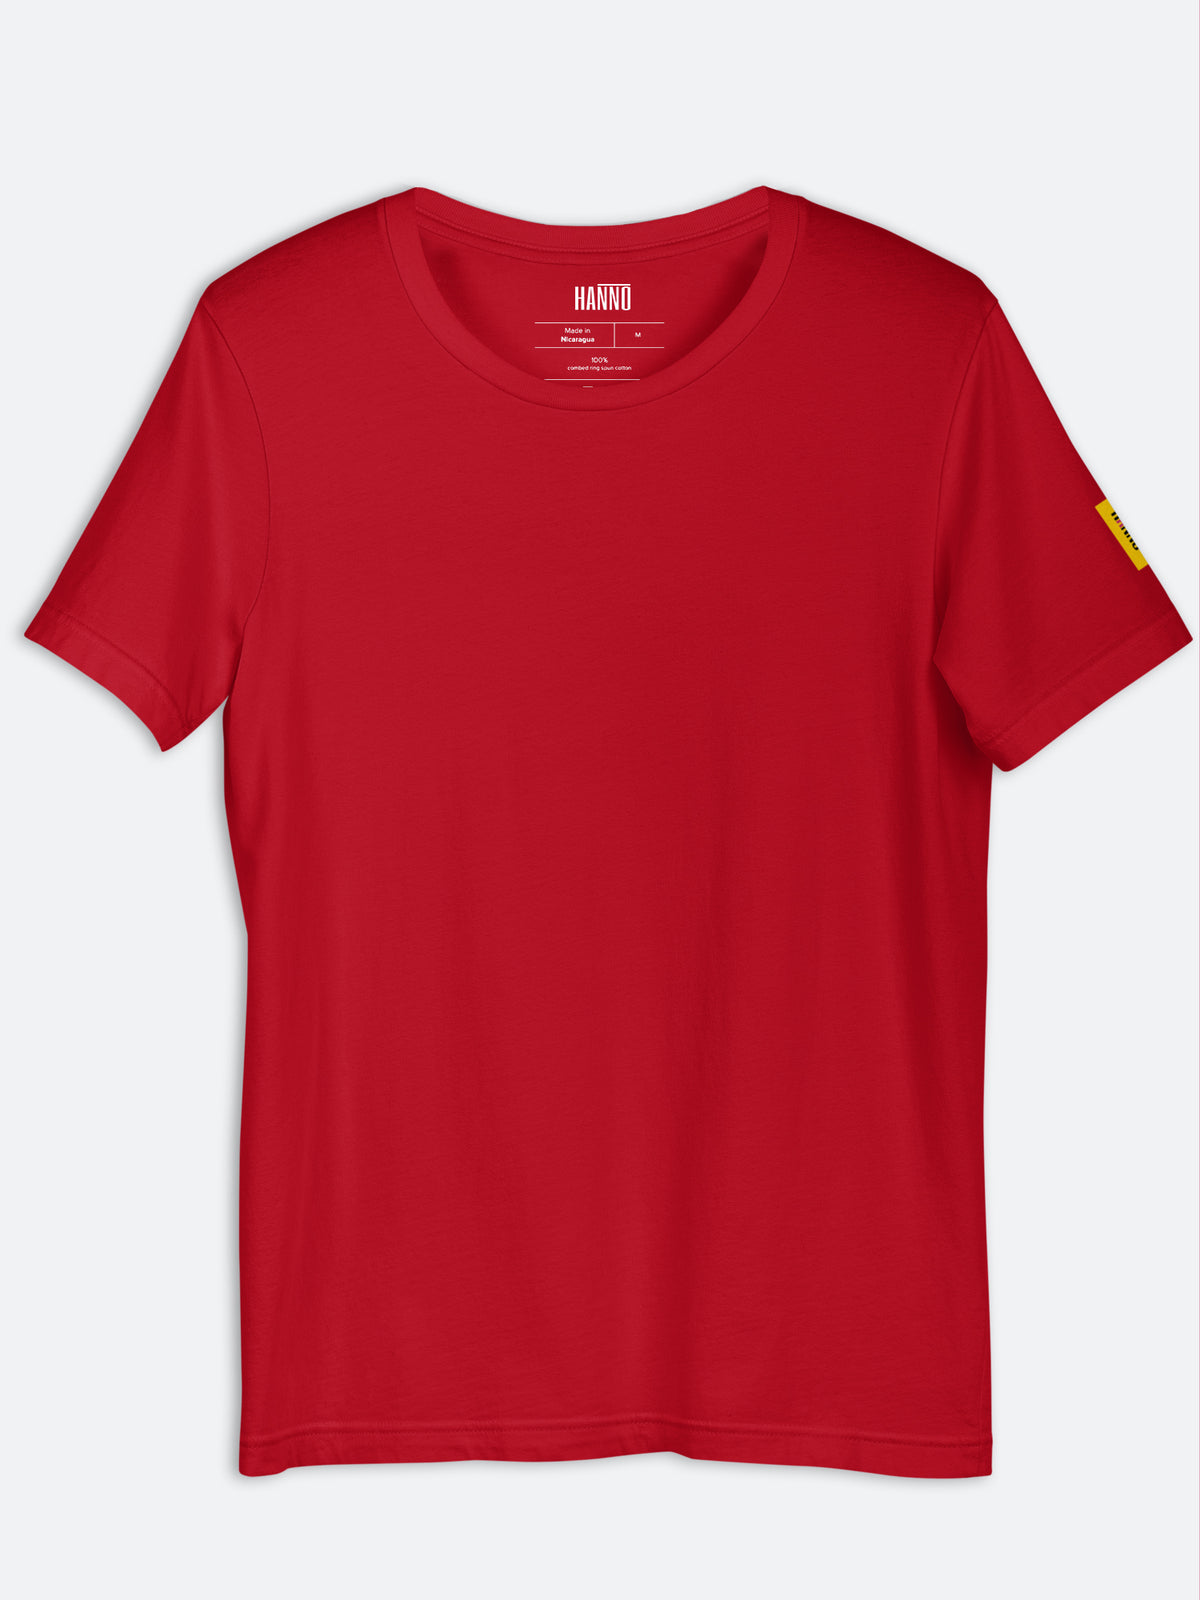 Hanno classic basic t shirt 100% cotton#color_red